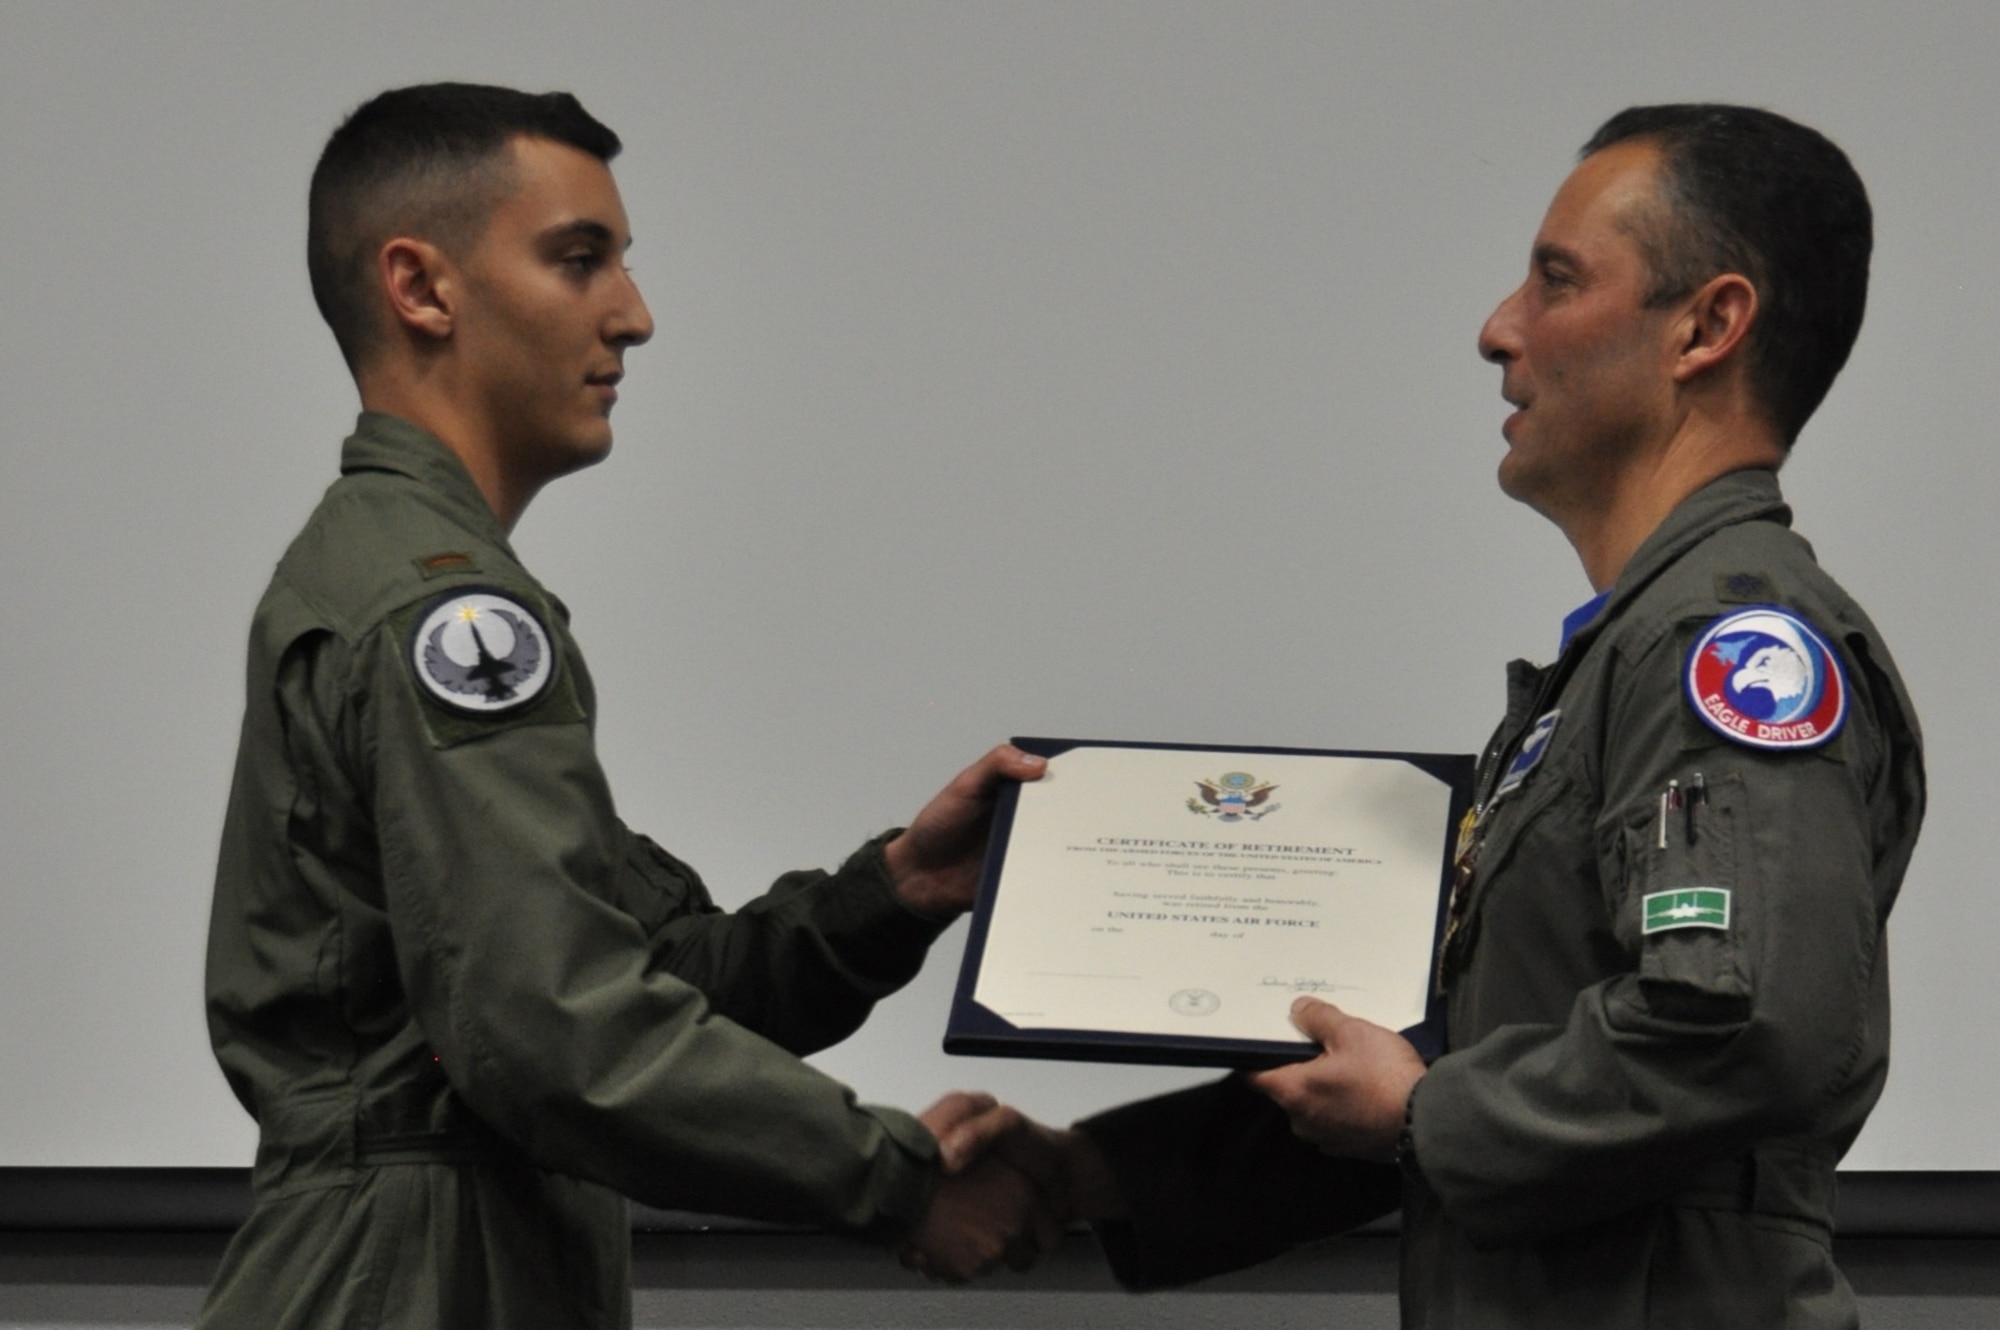 Lieutenant Mirarchi presents the retirement certificate to his father during the formal retirement ceremony. (U.S. Air Force photo by Debbie Gildea)